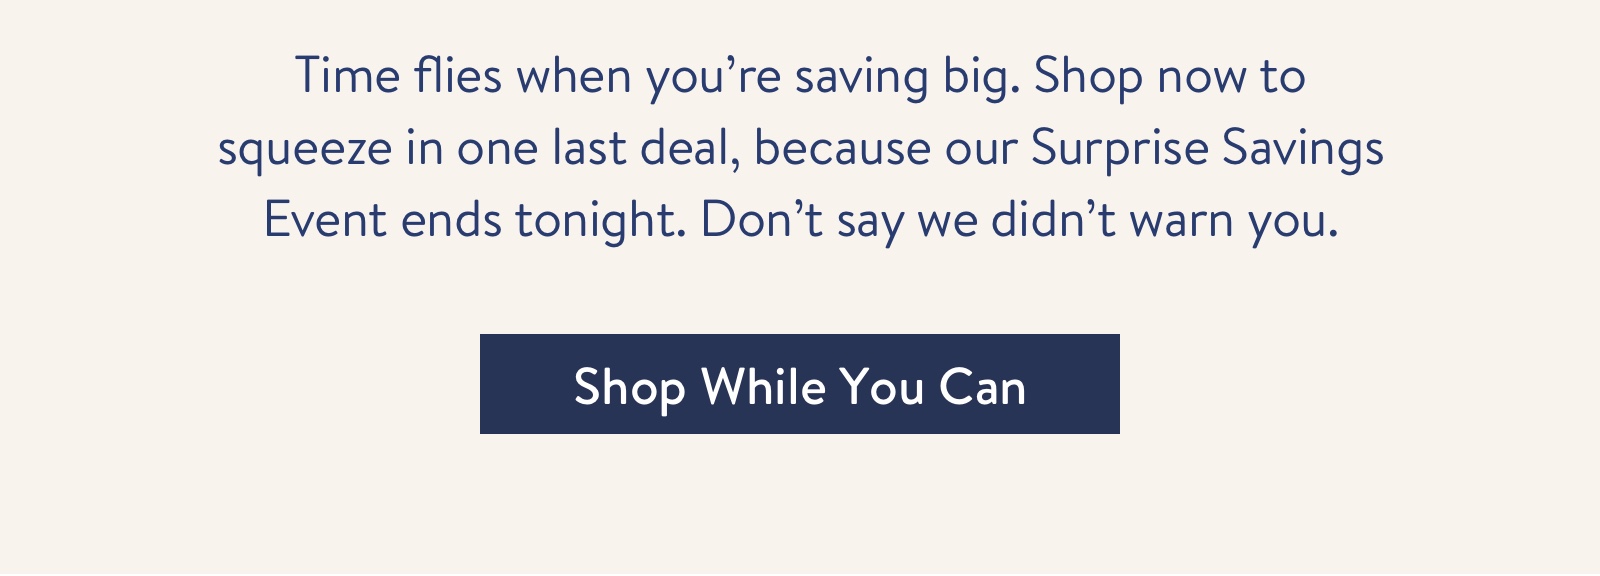 Shop now to squeeze in one last deal, because our Surprise Savings Event ends tonight.